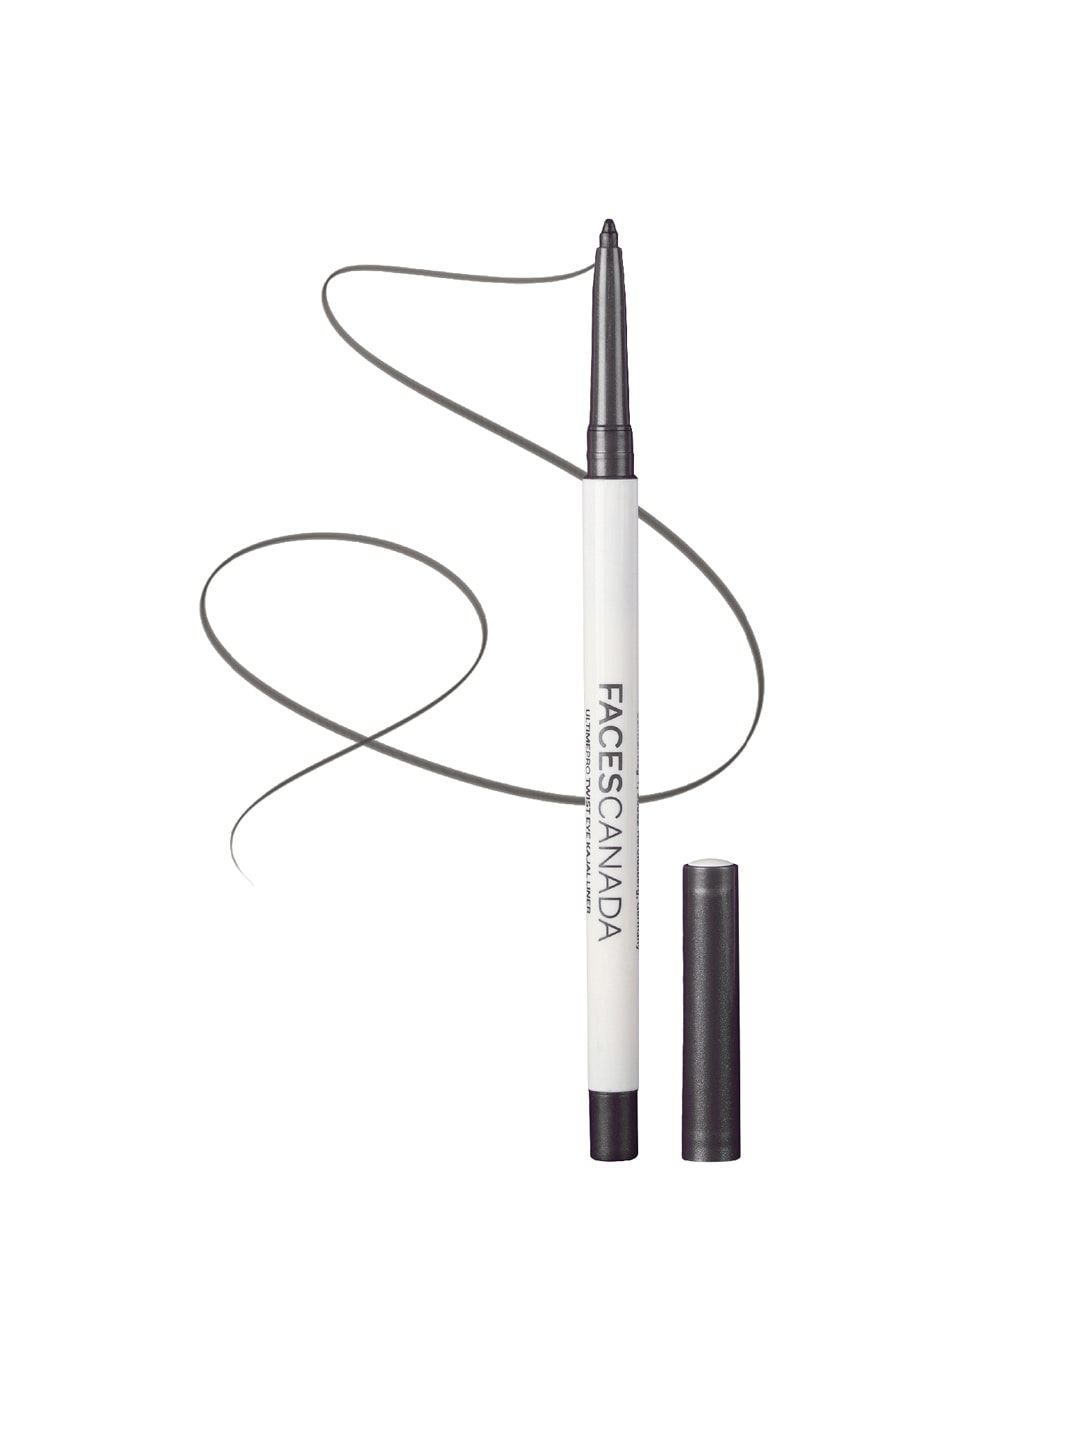 FACES CANADA Ultimepro Twist Eye Kajal Liner Silver 01 0.35g Price in India